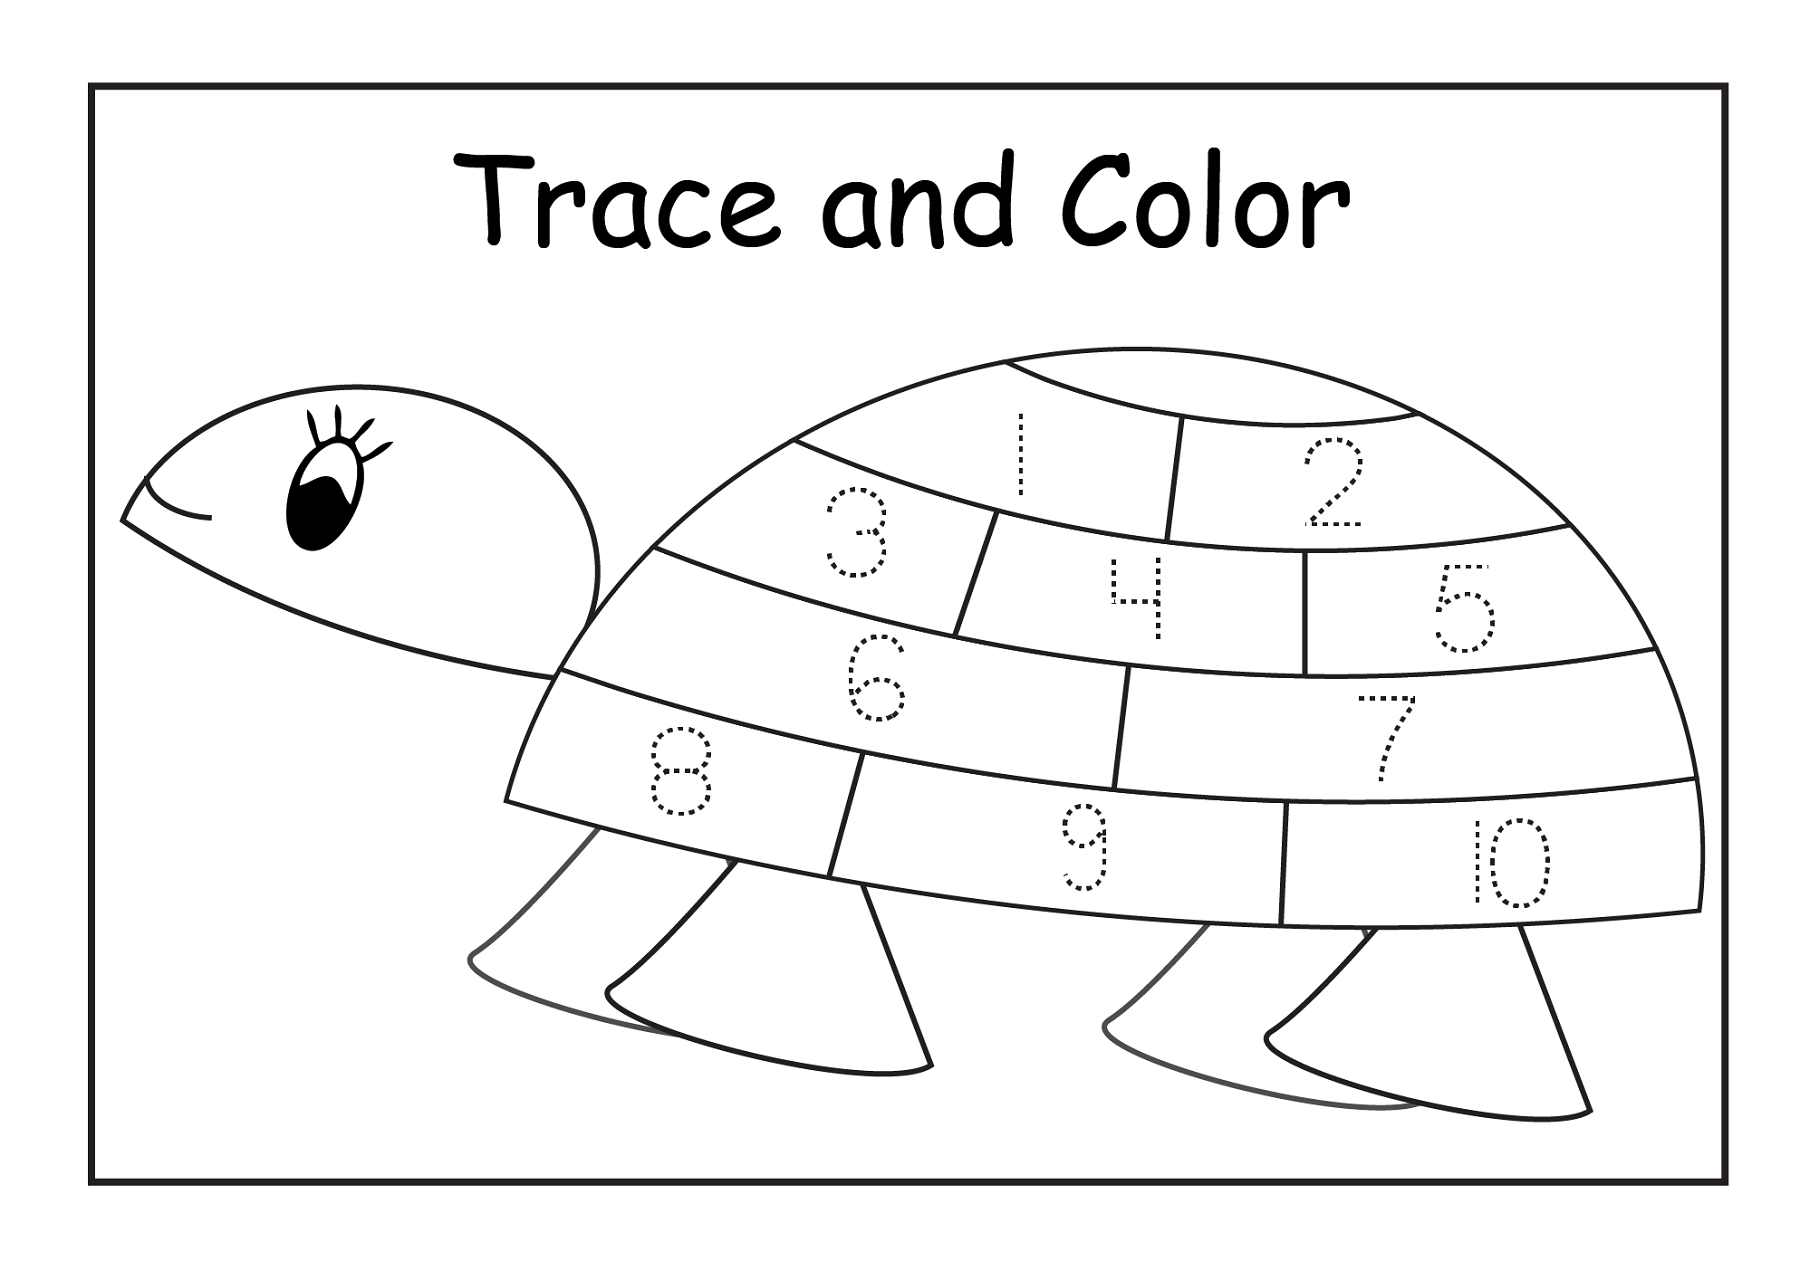 Traceable Numbers 1-10 Worksheets to Print | Activity Shelter